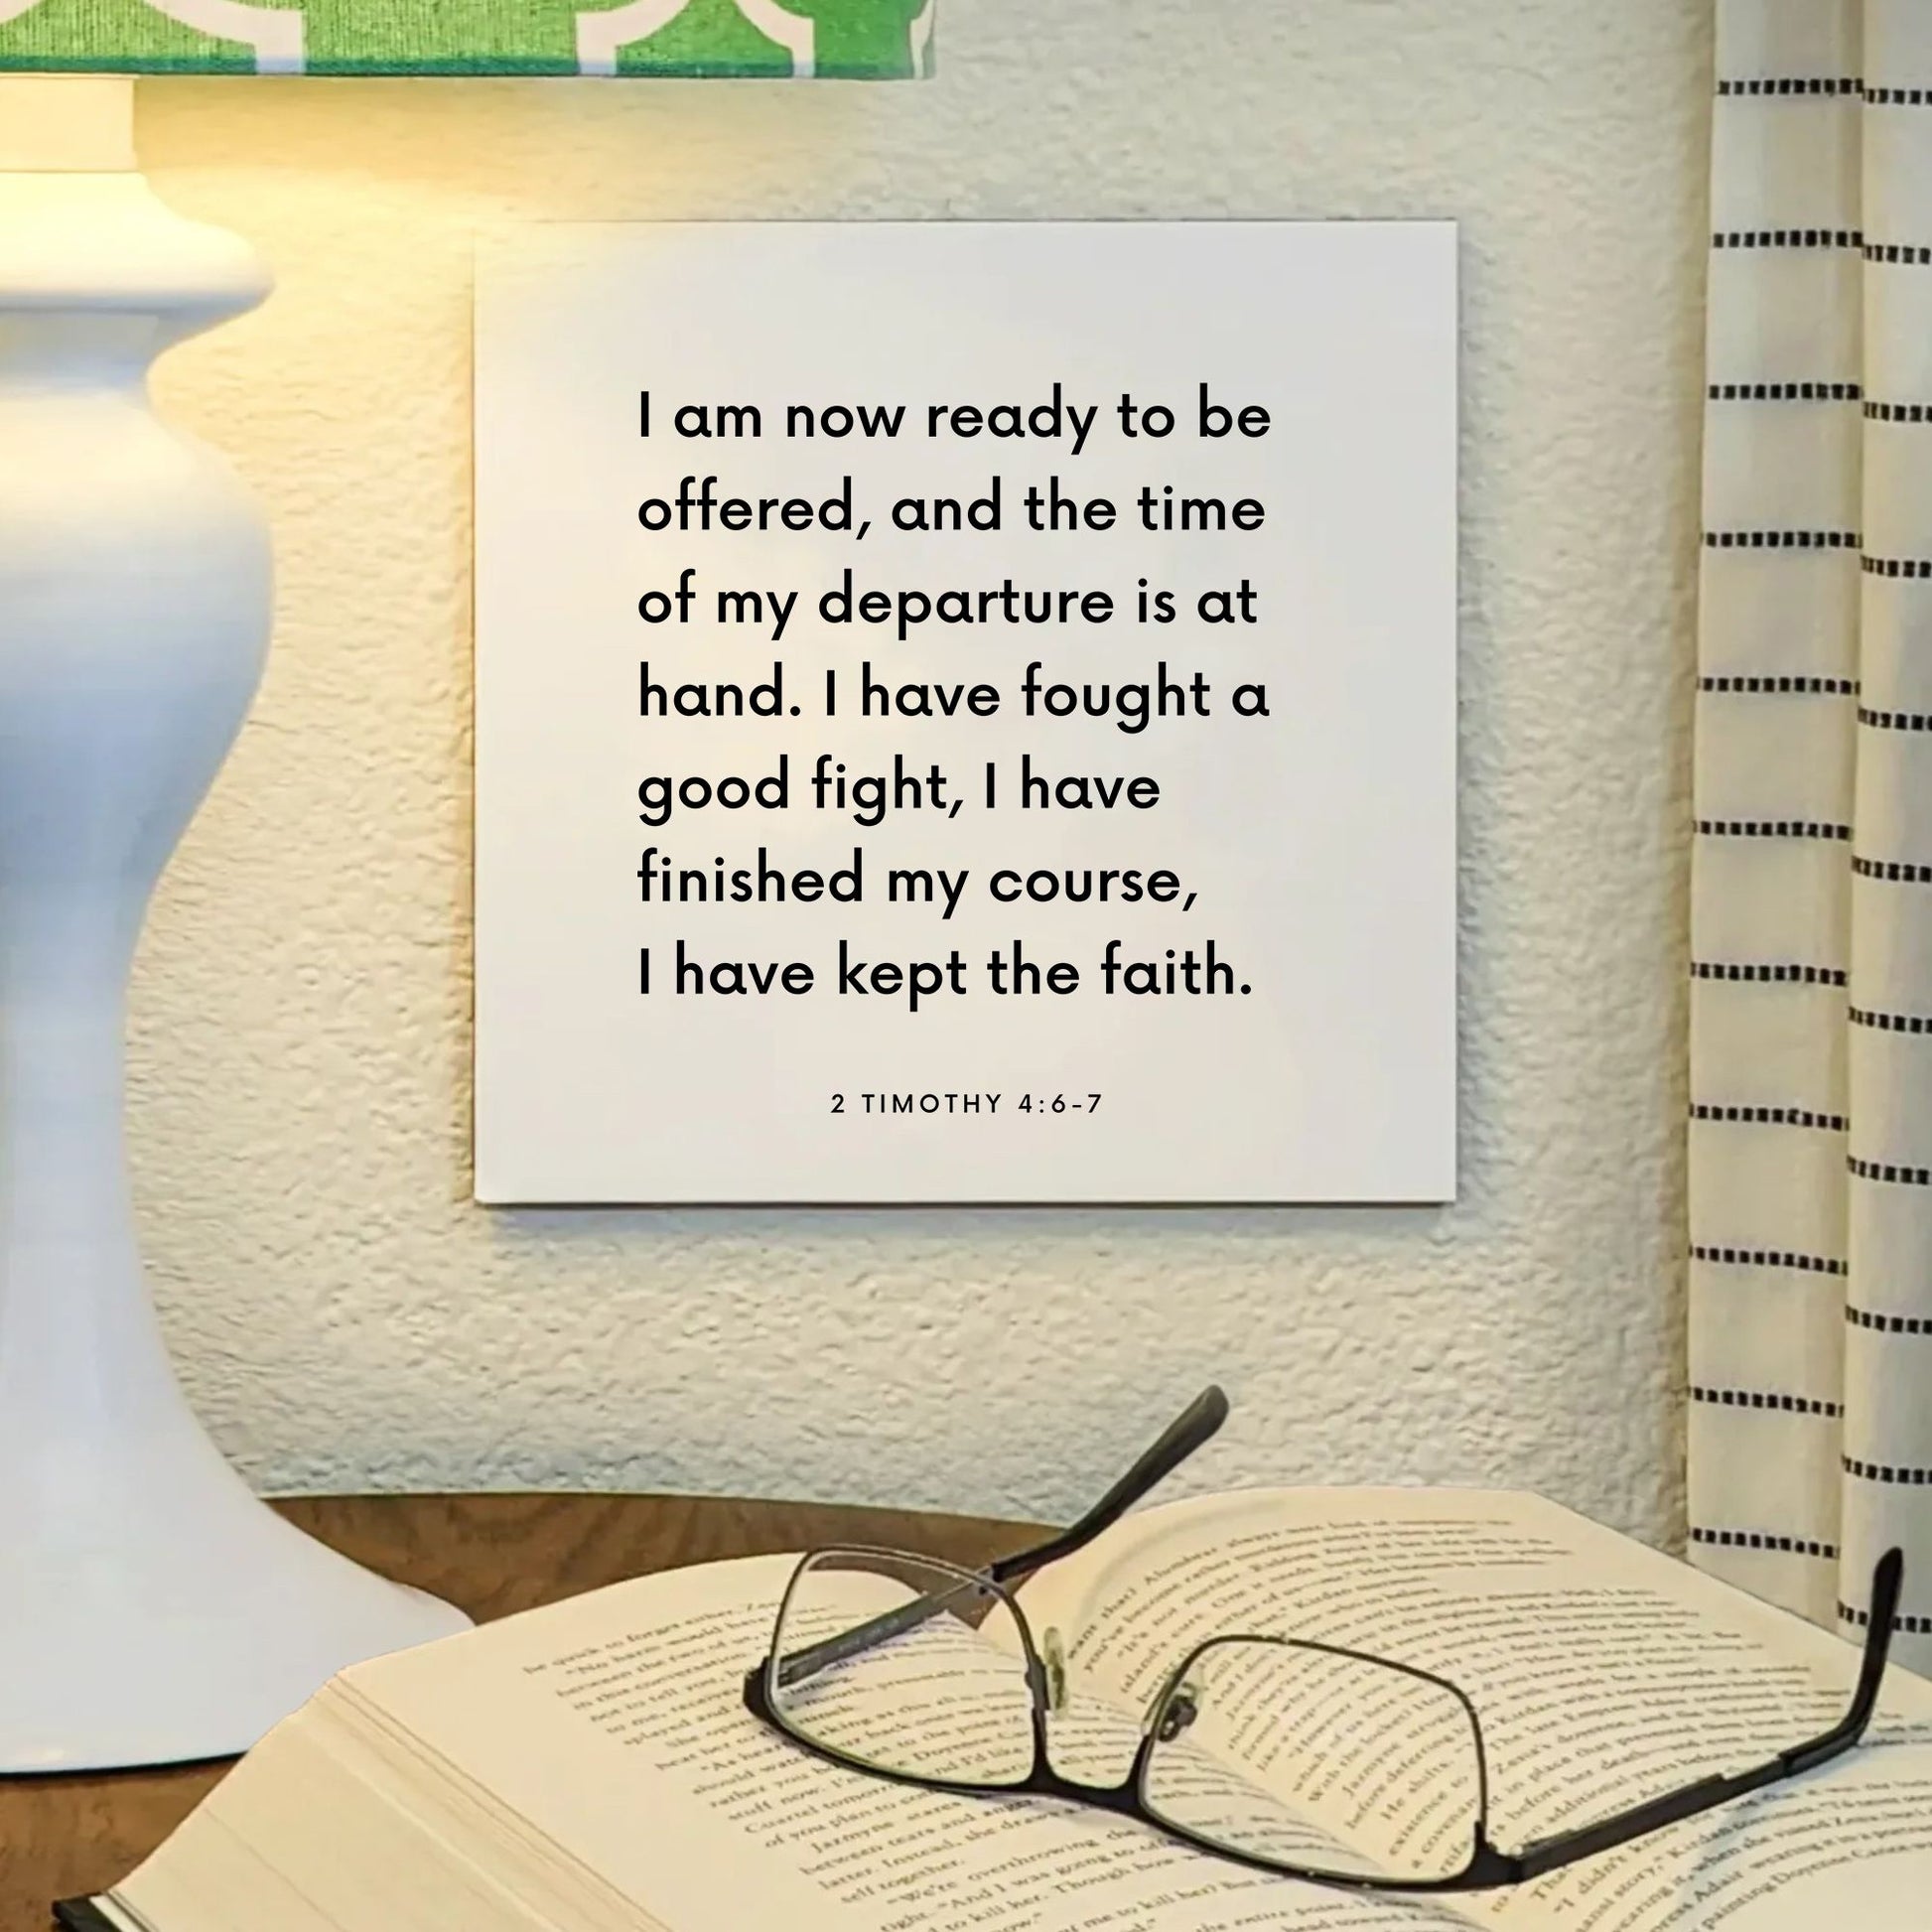 Lamp mouting of the scripture tile for 2 Timothy 4:6-7 - "I have fought a good fight, I have kept the faith"